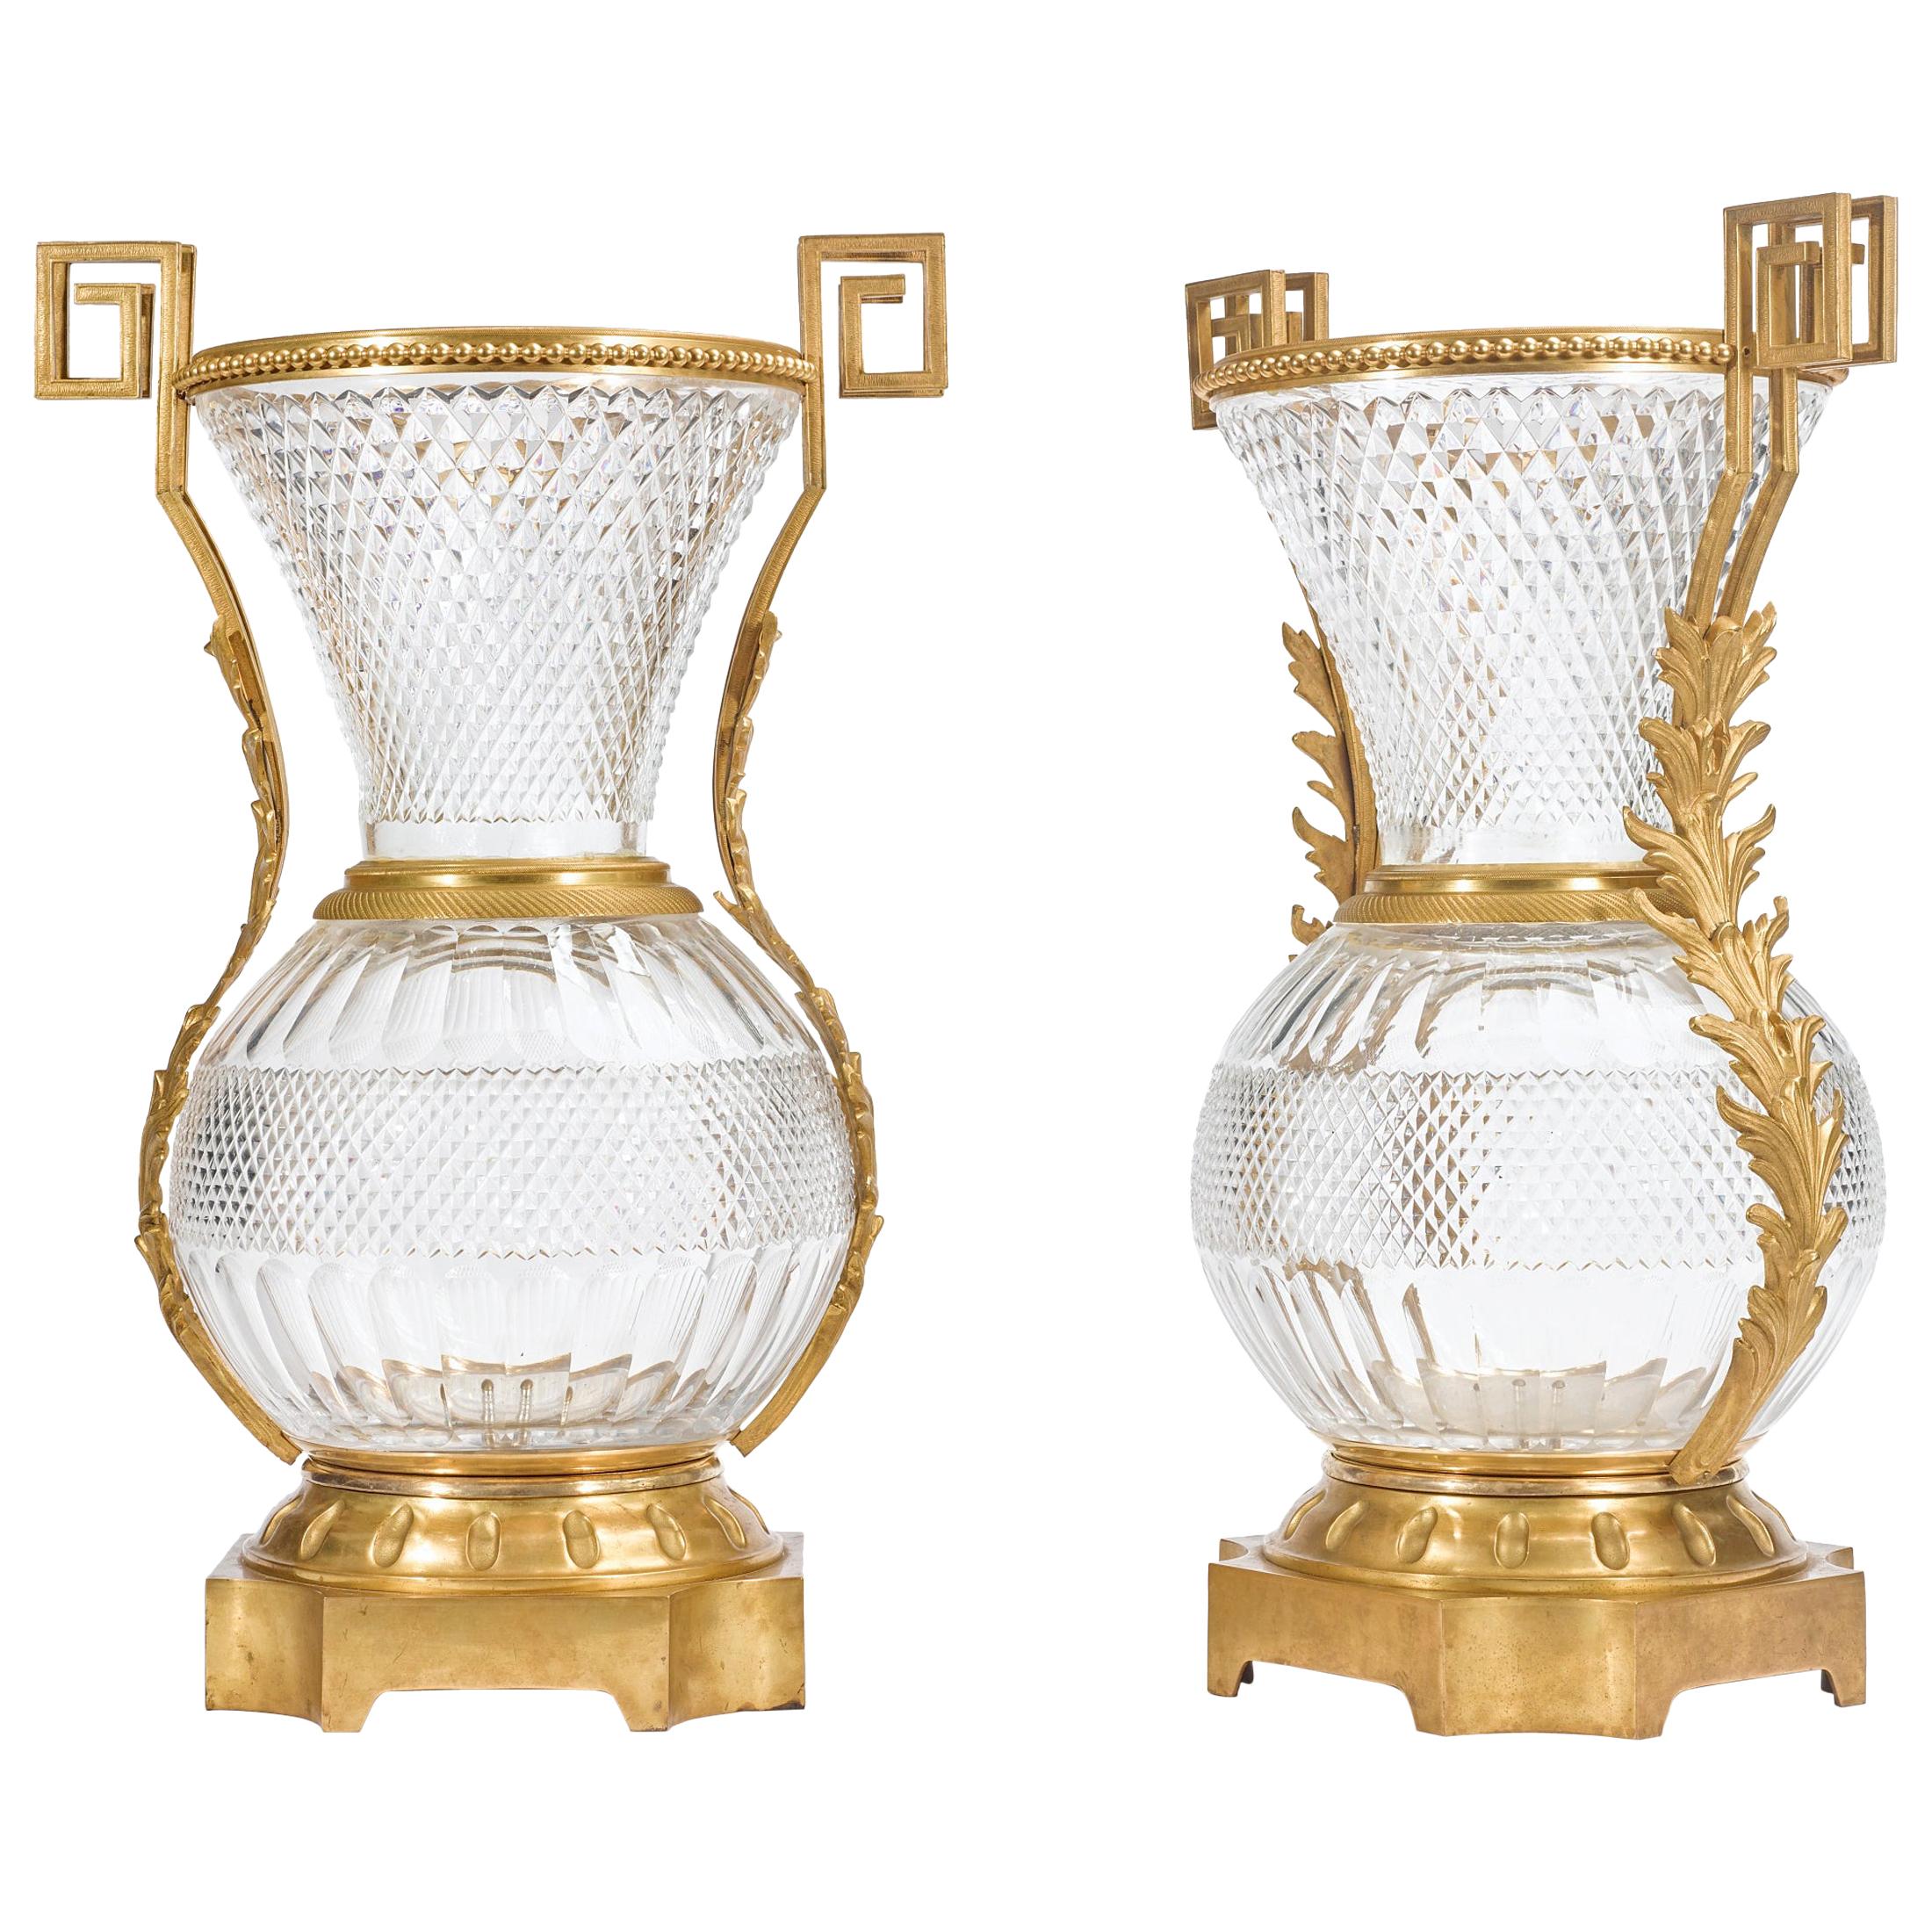 Early 20th Century Pair of Monumental French Ormolu-Mounted Cut Crystal Vases